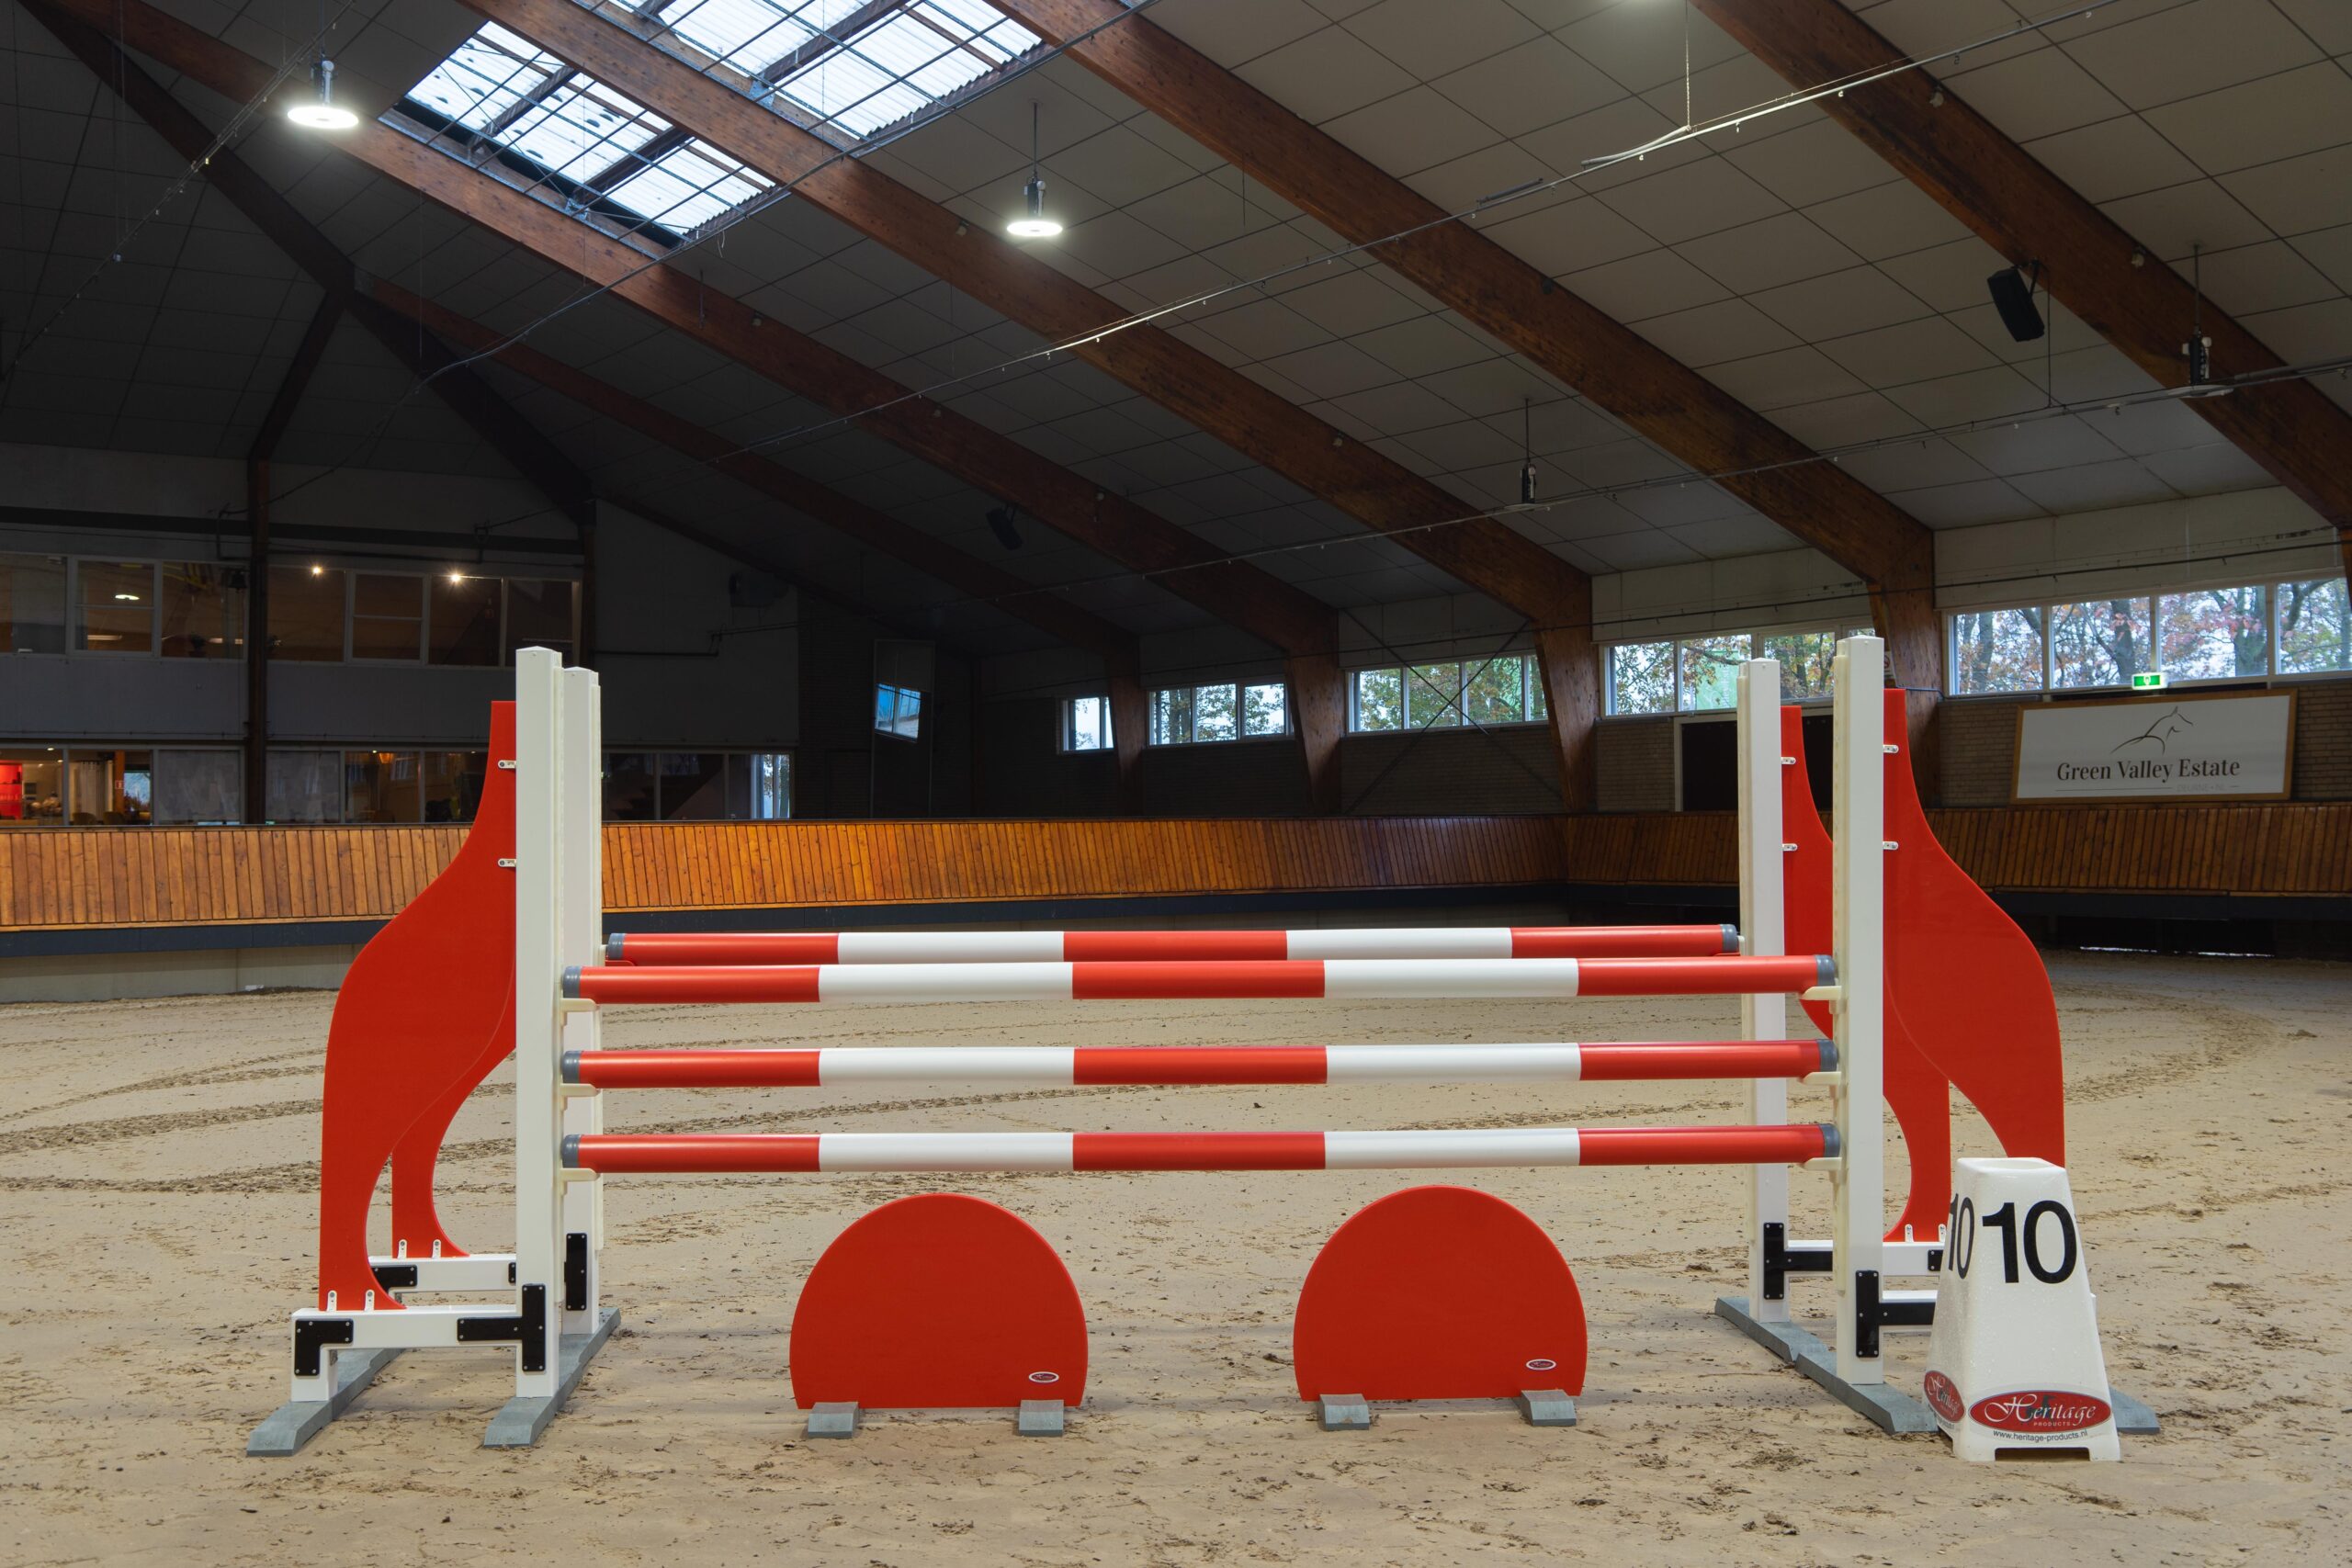 Obstakel paard | Heritage Products B.V.